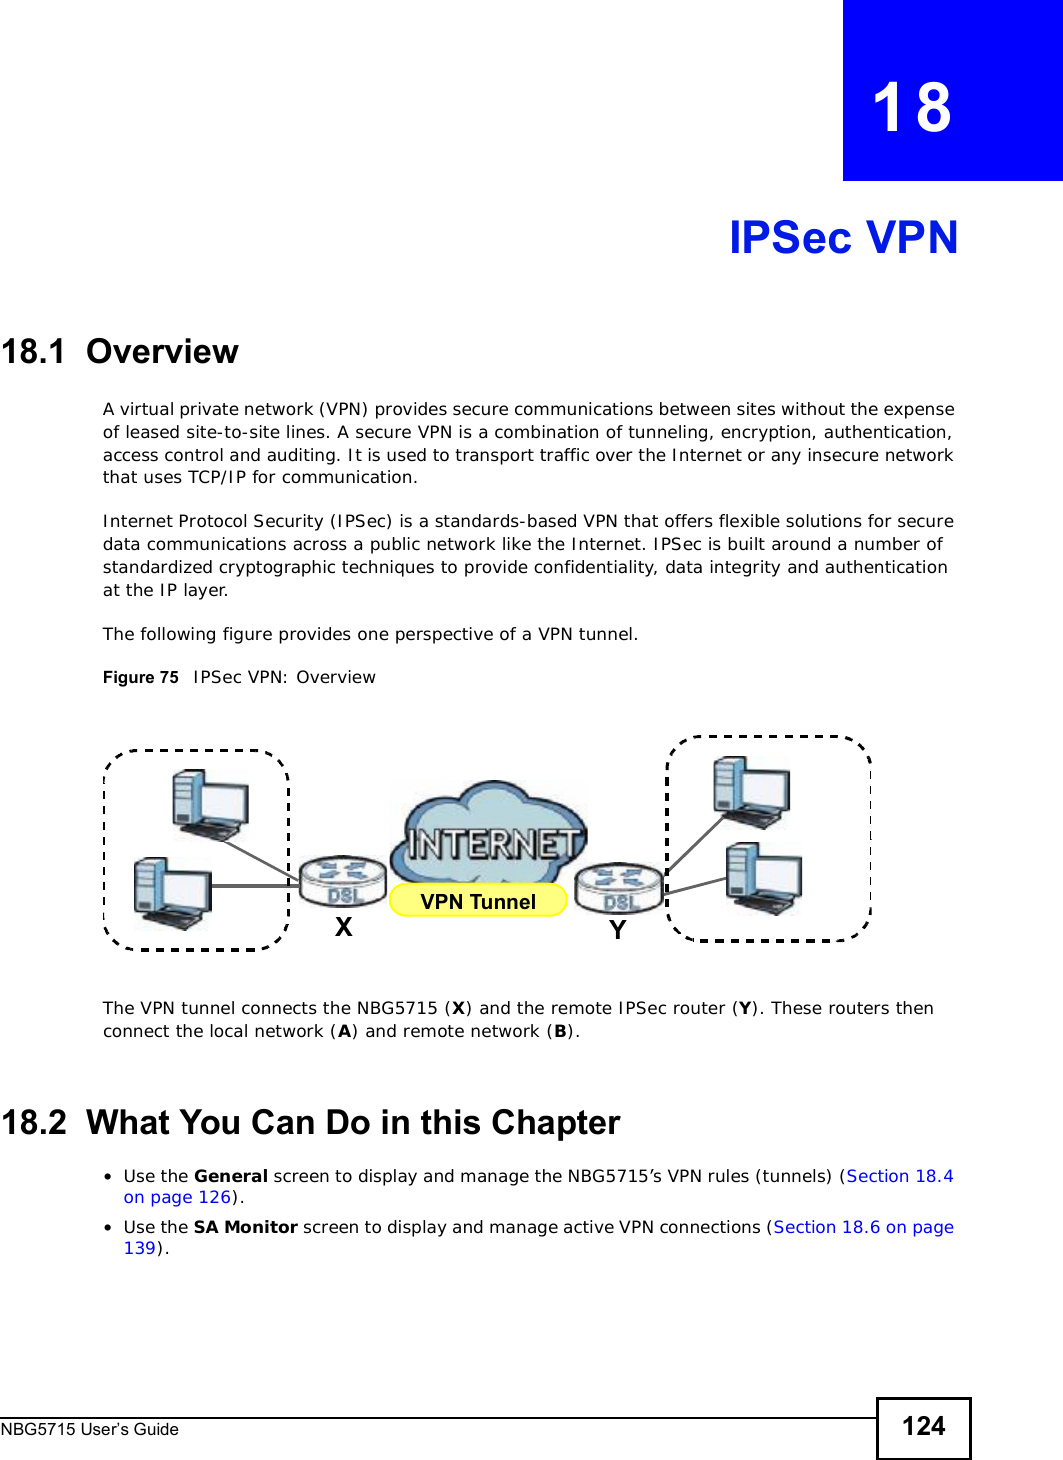 NBG5715 User’s Guide 124CHAPTER   18IPSec VPN18.1  OverviewA virtual private network (VPN) provides secure communications between sites without the expense of leased site-to-site lines. A secure VPN is a combination of tunneling, encryption, authentication, access control and auditing. It is used to transport traffic over the Internet or any insecure network that uses TCP/IP for communication.Internet Protocol Security (IPSec) is a standards-based VPN that offers flexible solutions for secure data communications across a public network like the Internet. IPSec is built around a number of standardized cryptographic techniques to provide confidentiality, data integrity and authentication at the IP layer.The following figure provides one perspective of a VPN tunnel.Figure 75   IPSec VPN: OverviewThe VPN tunnel connects the NBG5715 (X) and the remote IPSec router (Y). These routers then connect the local network (A) and remote network (B).18.2  What You Can Do in this Chapter•Use the General screen to display and manage the NBG5715’s VPN rules (tunnels) (Section 18.4 on page 126).•Use the SA Monitor screen to display and manage active VPN connections (Section 18.6 on page 139).VPN TunnelXY